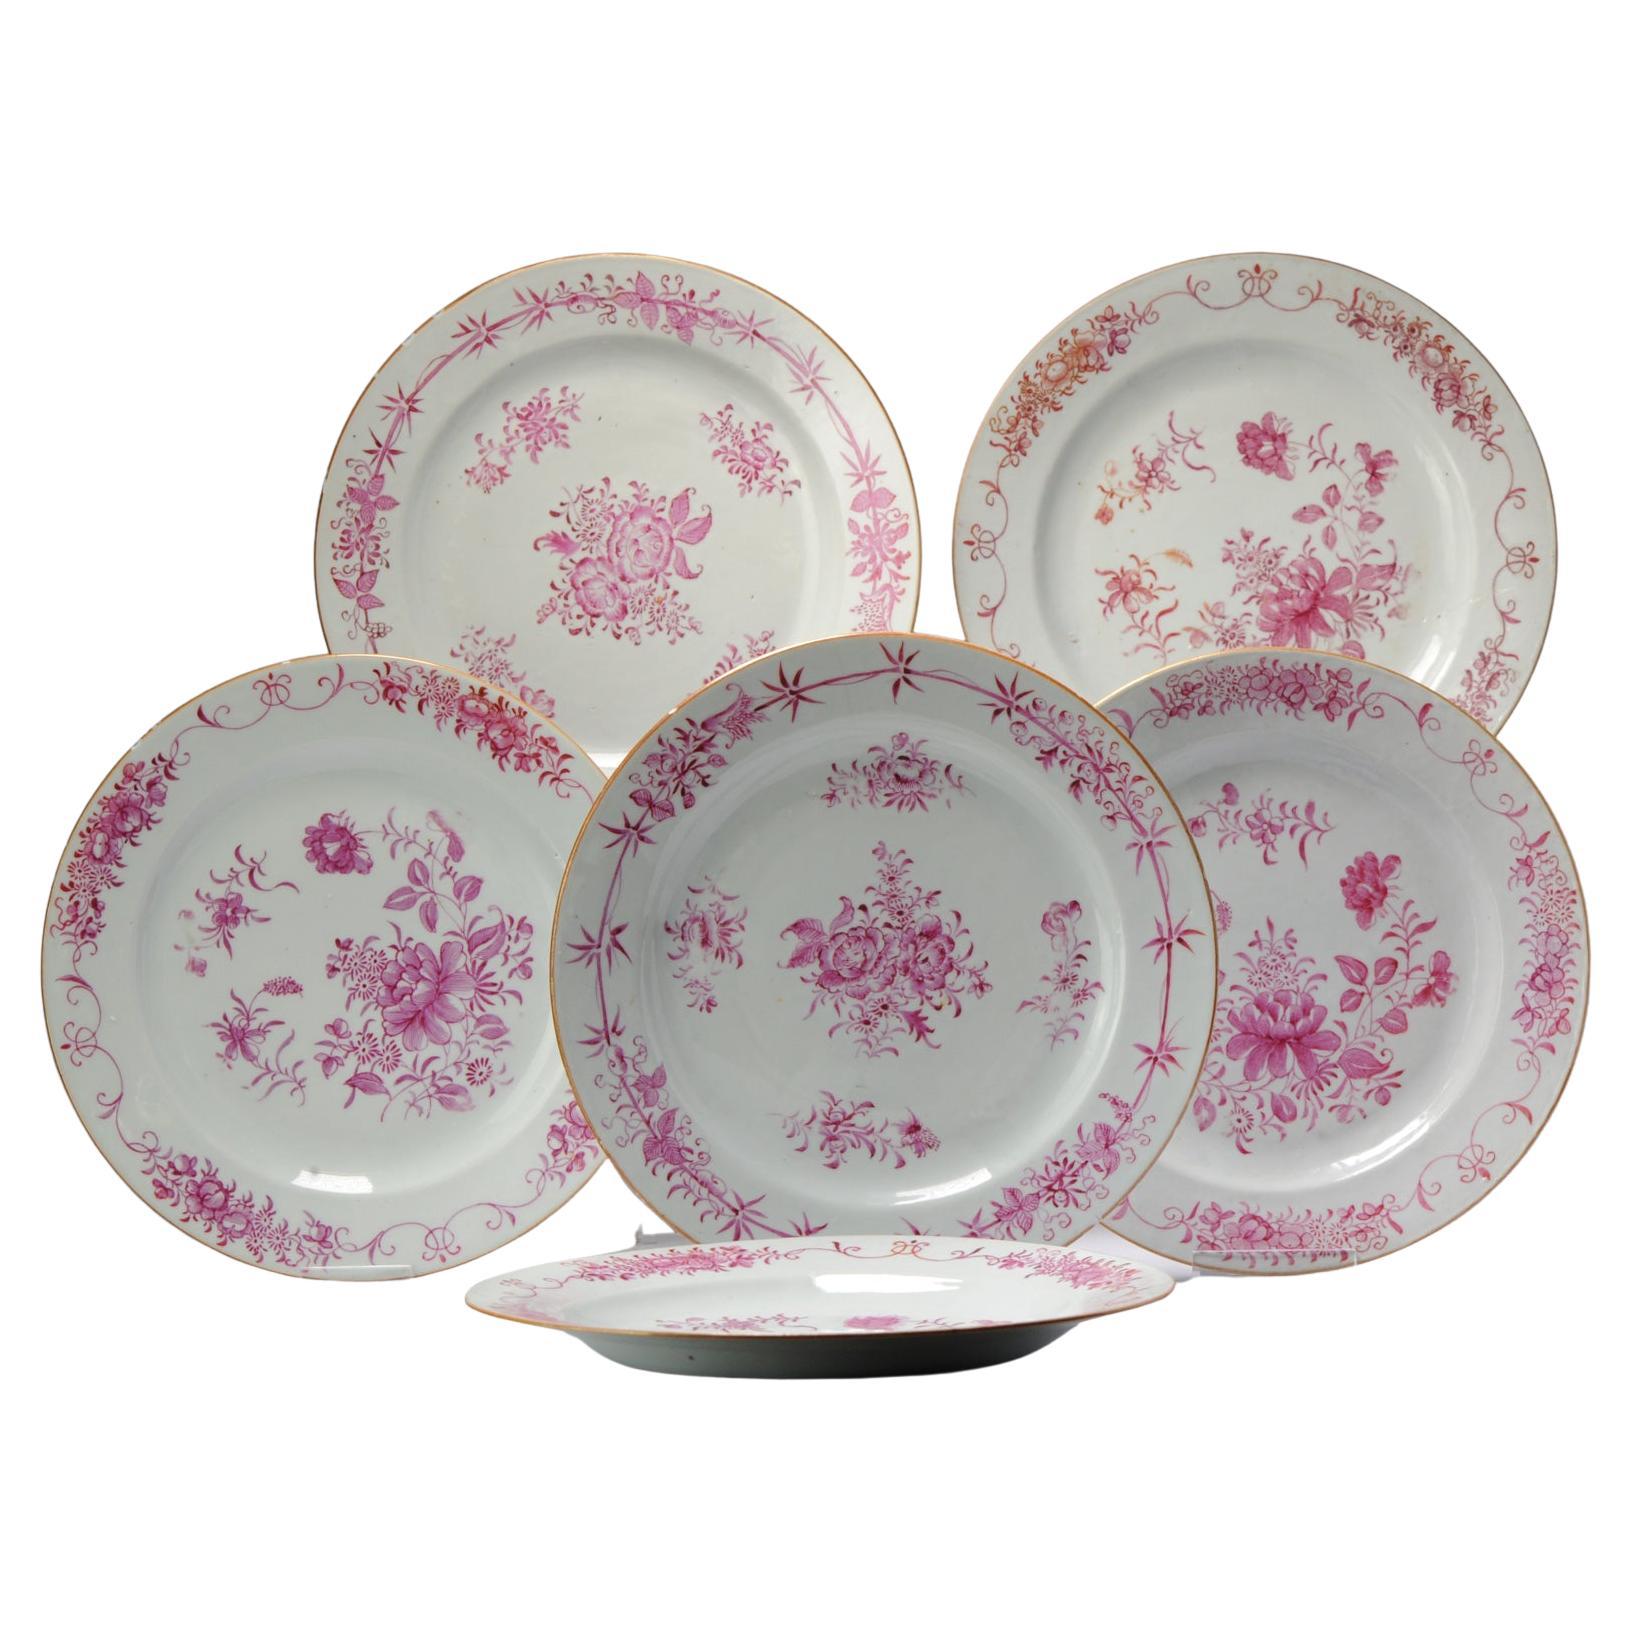 #5 Antique Chinese Porcelain 18th C Qianlong Period Famille Rose Dinner Plates For Sale